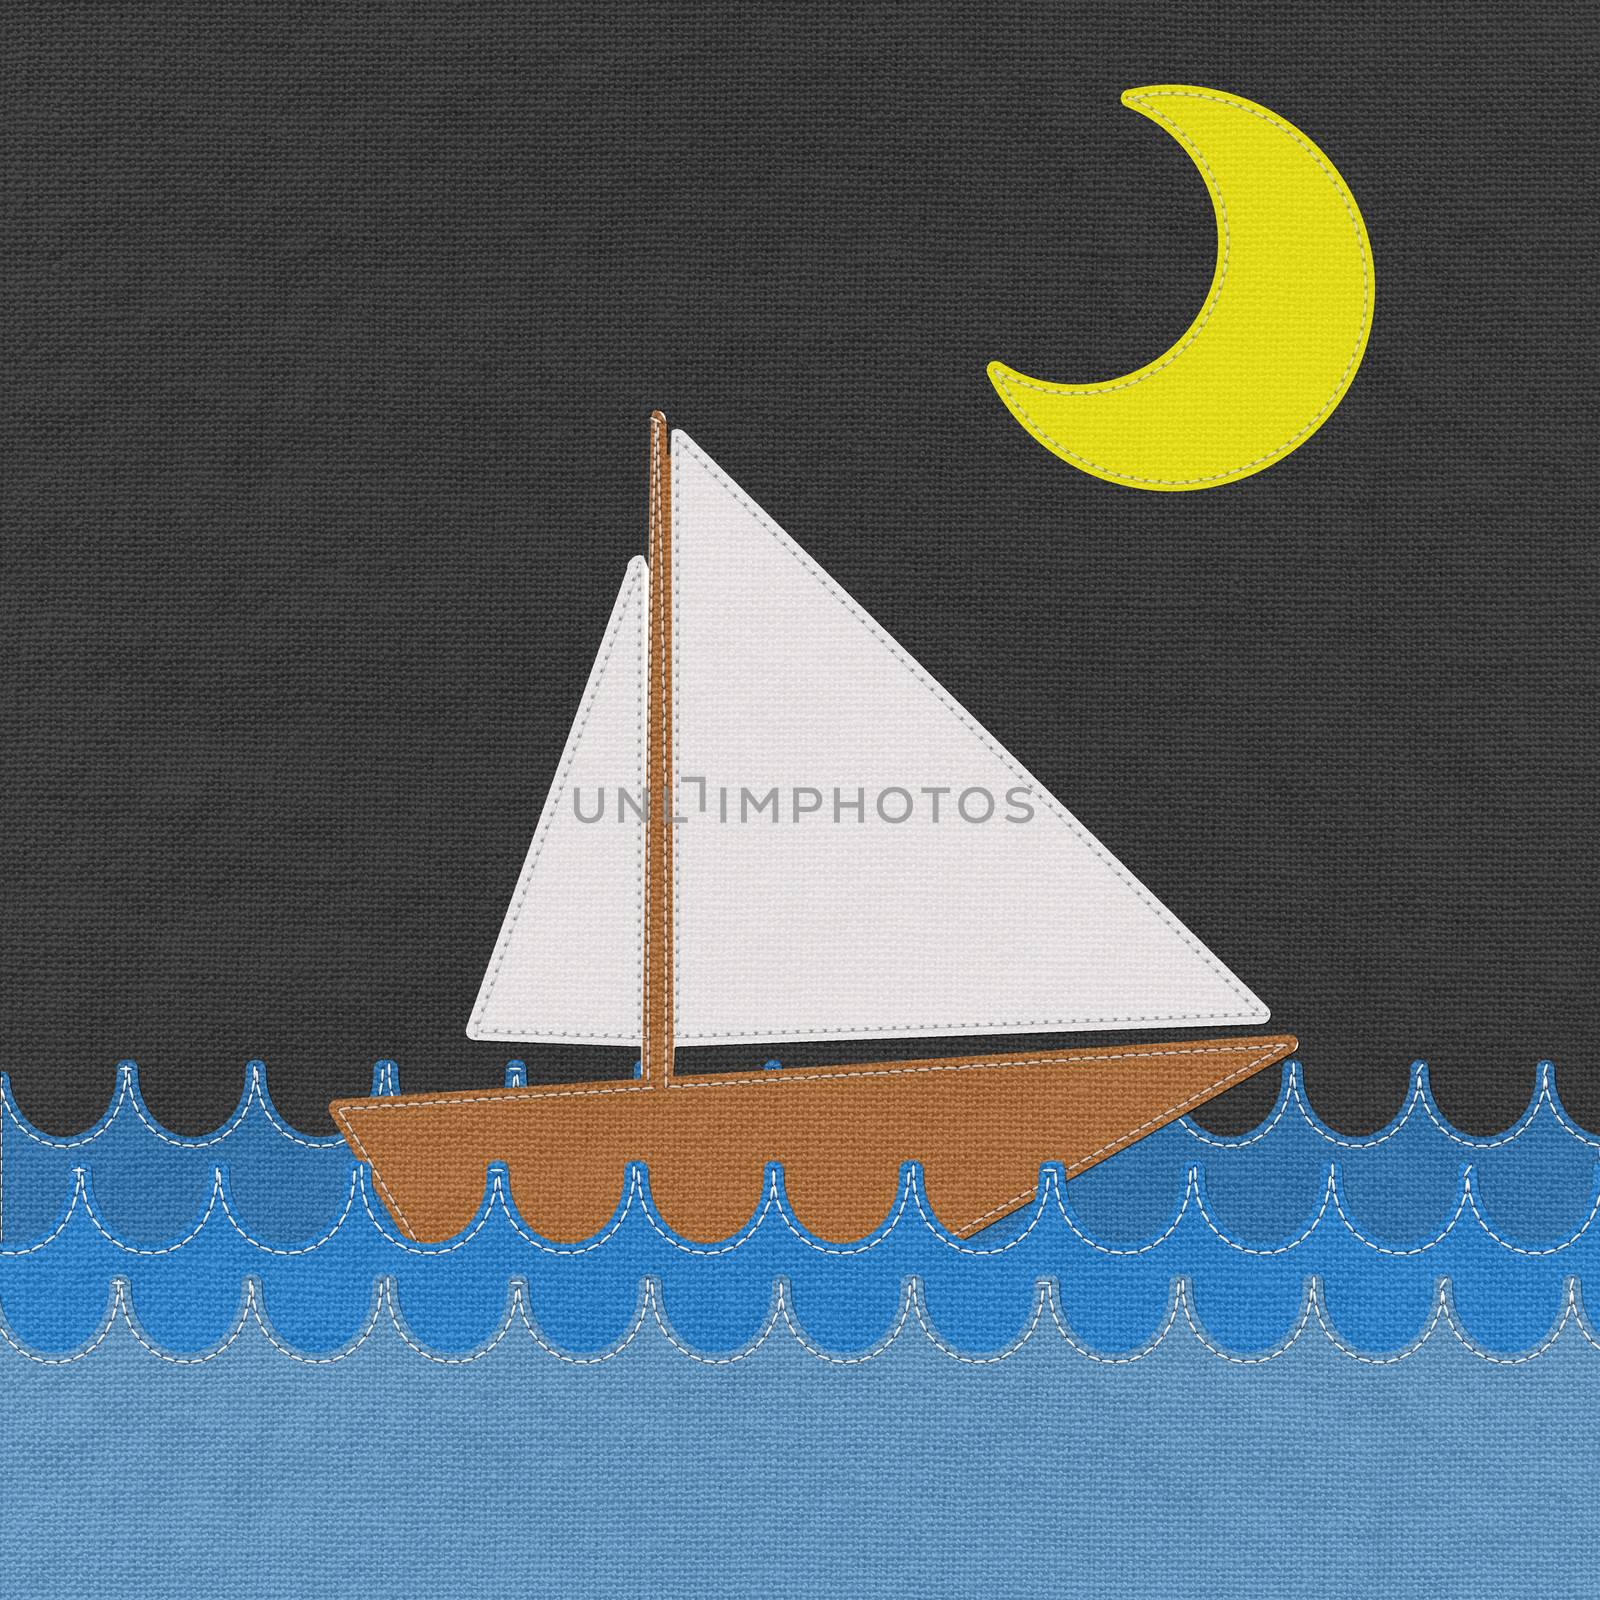 Boat in the sea with stitch style on fabric background by basketman23